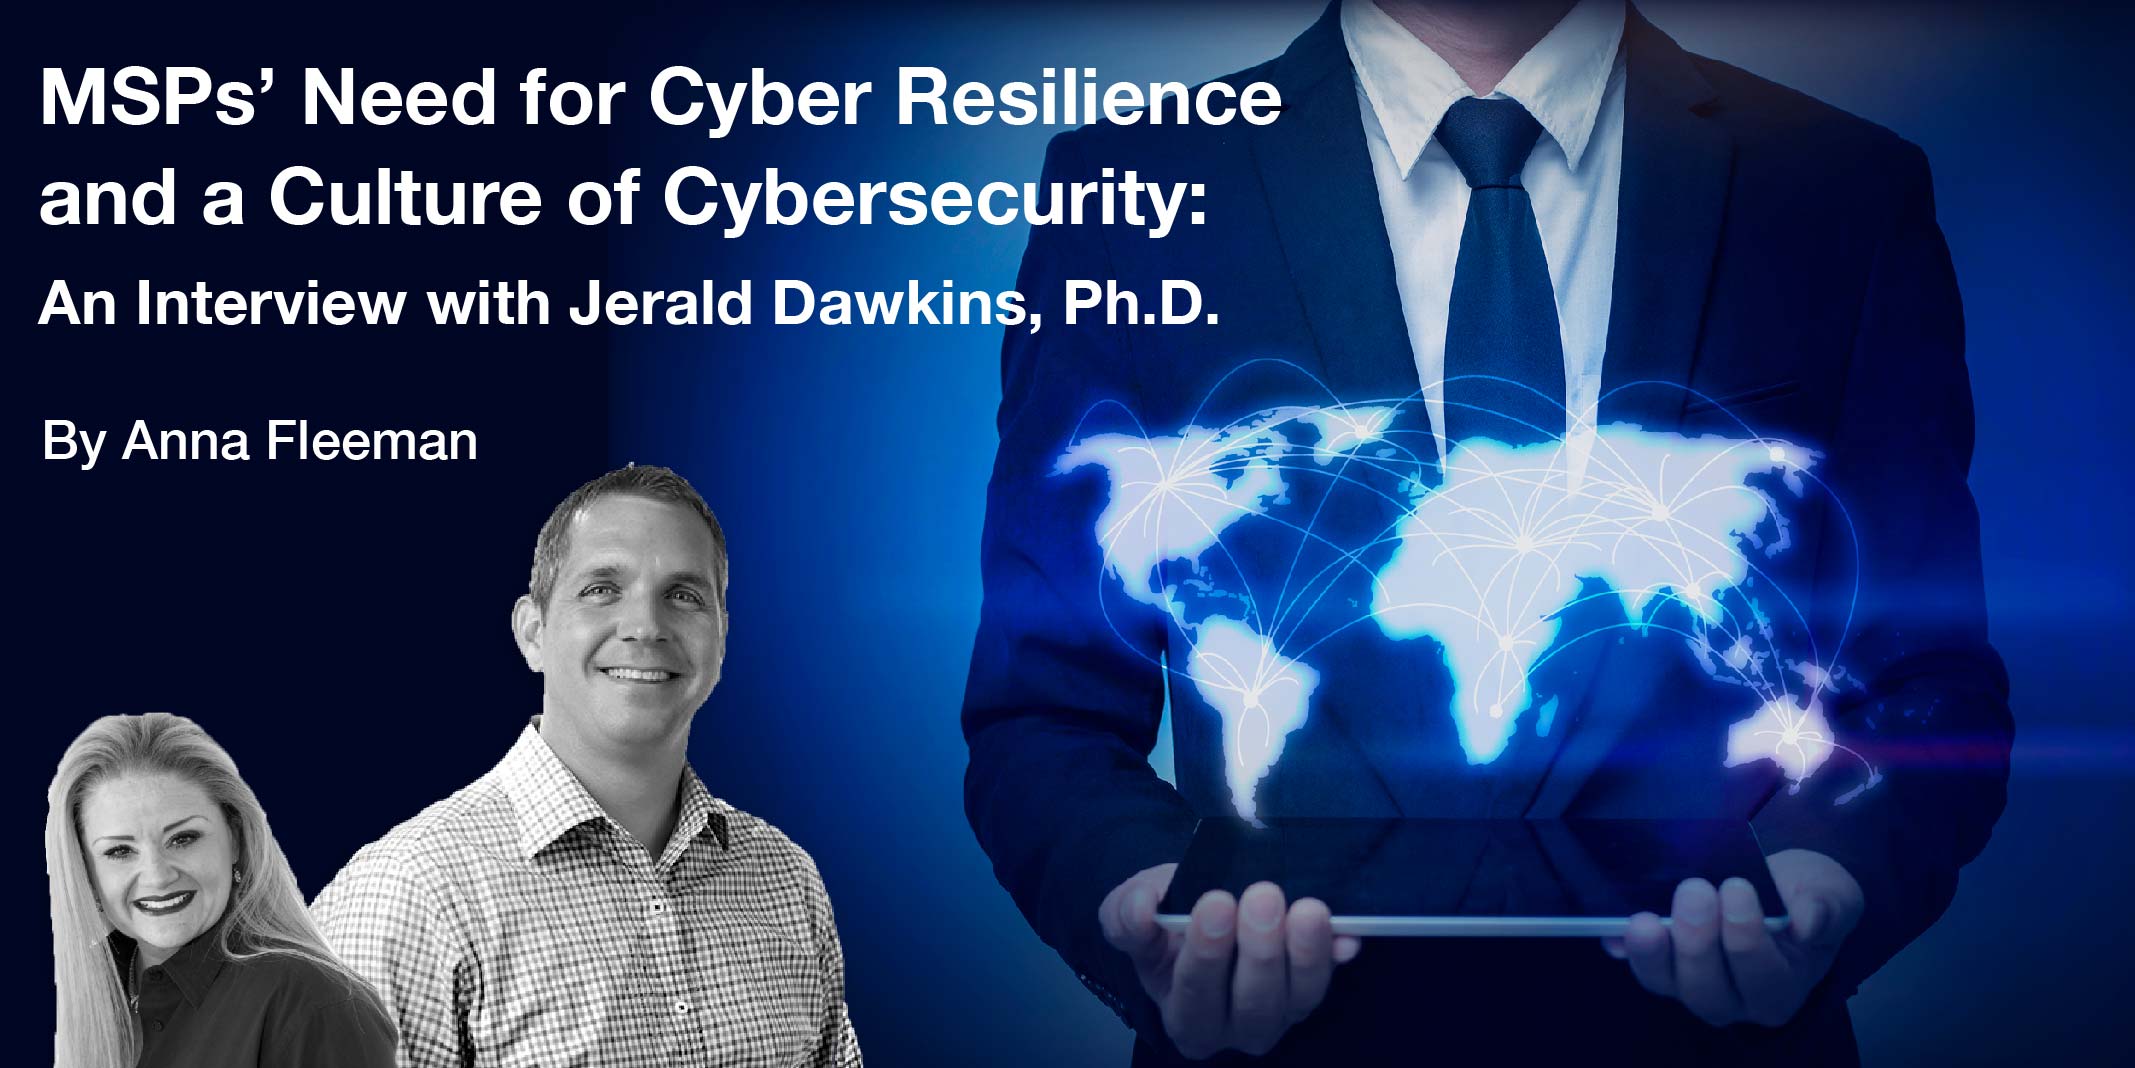 MSPs’ Need for Cyber Resilience and a Culture of Cybersecurity: An Interview with Jerald Dawkins, Ph.D.